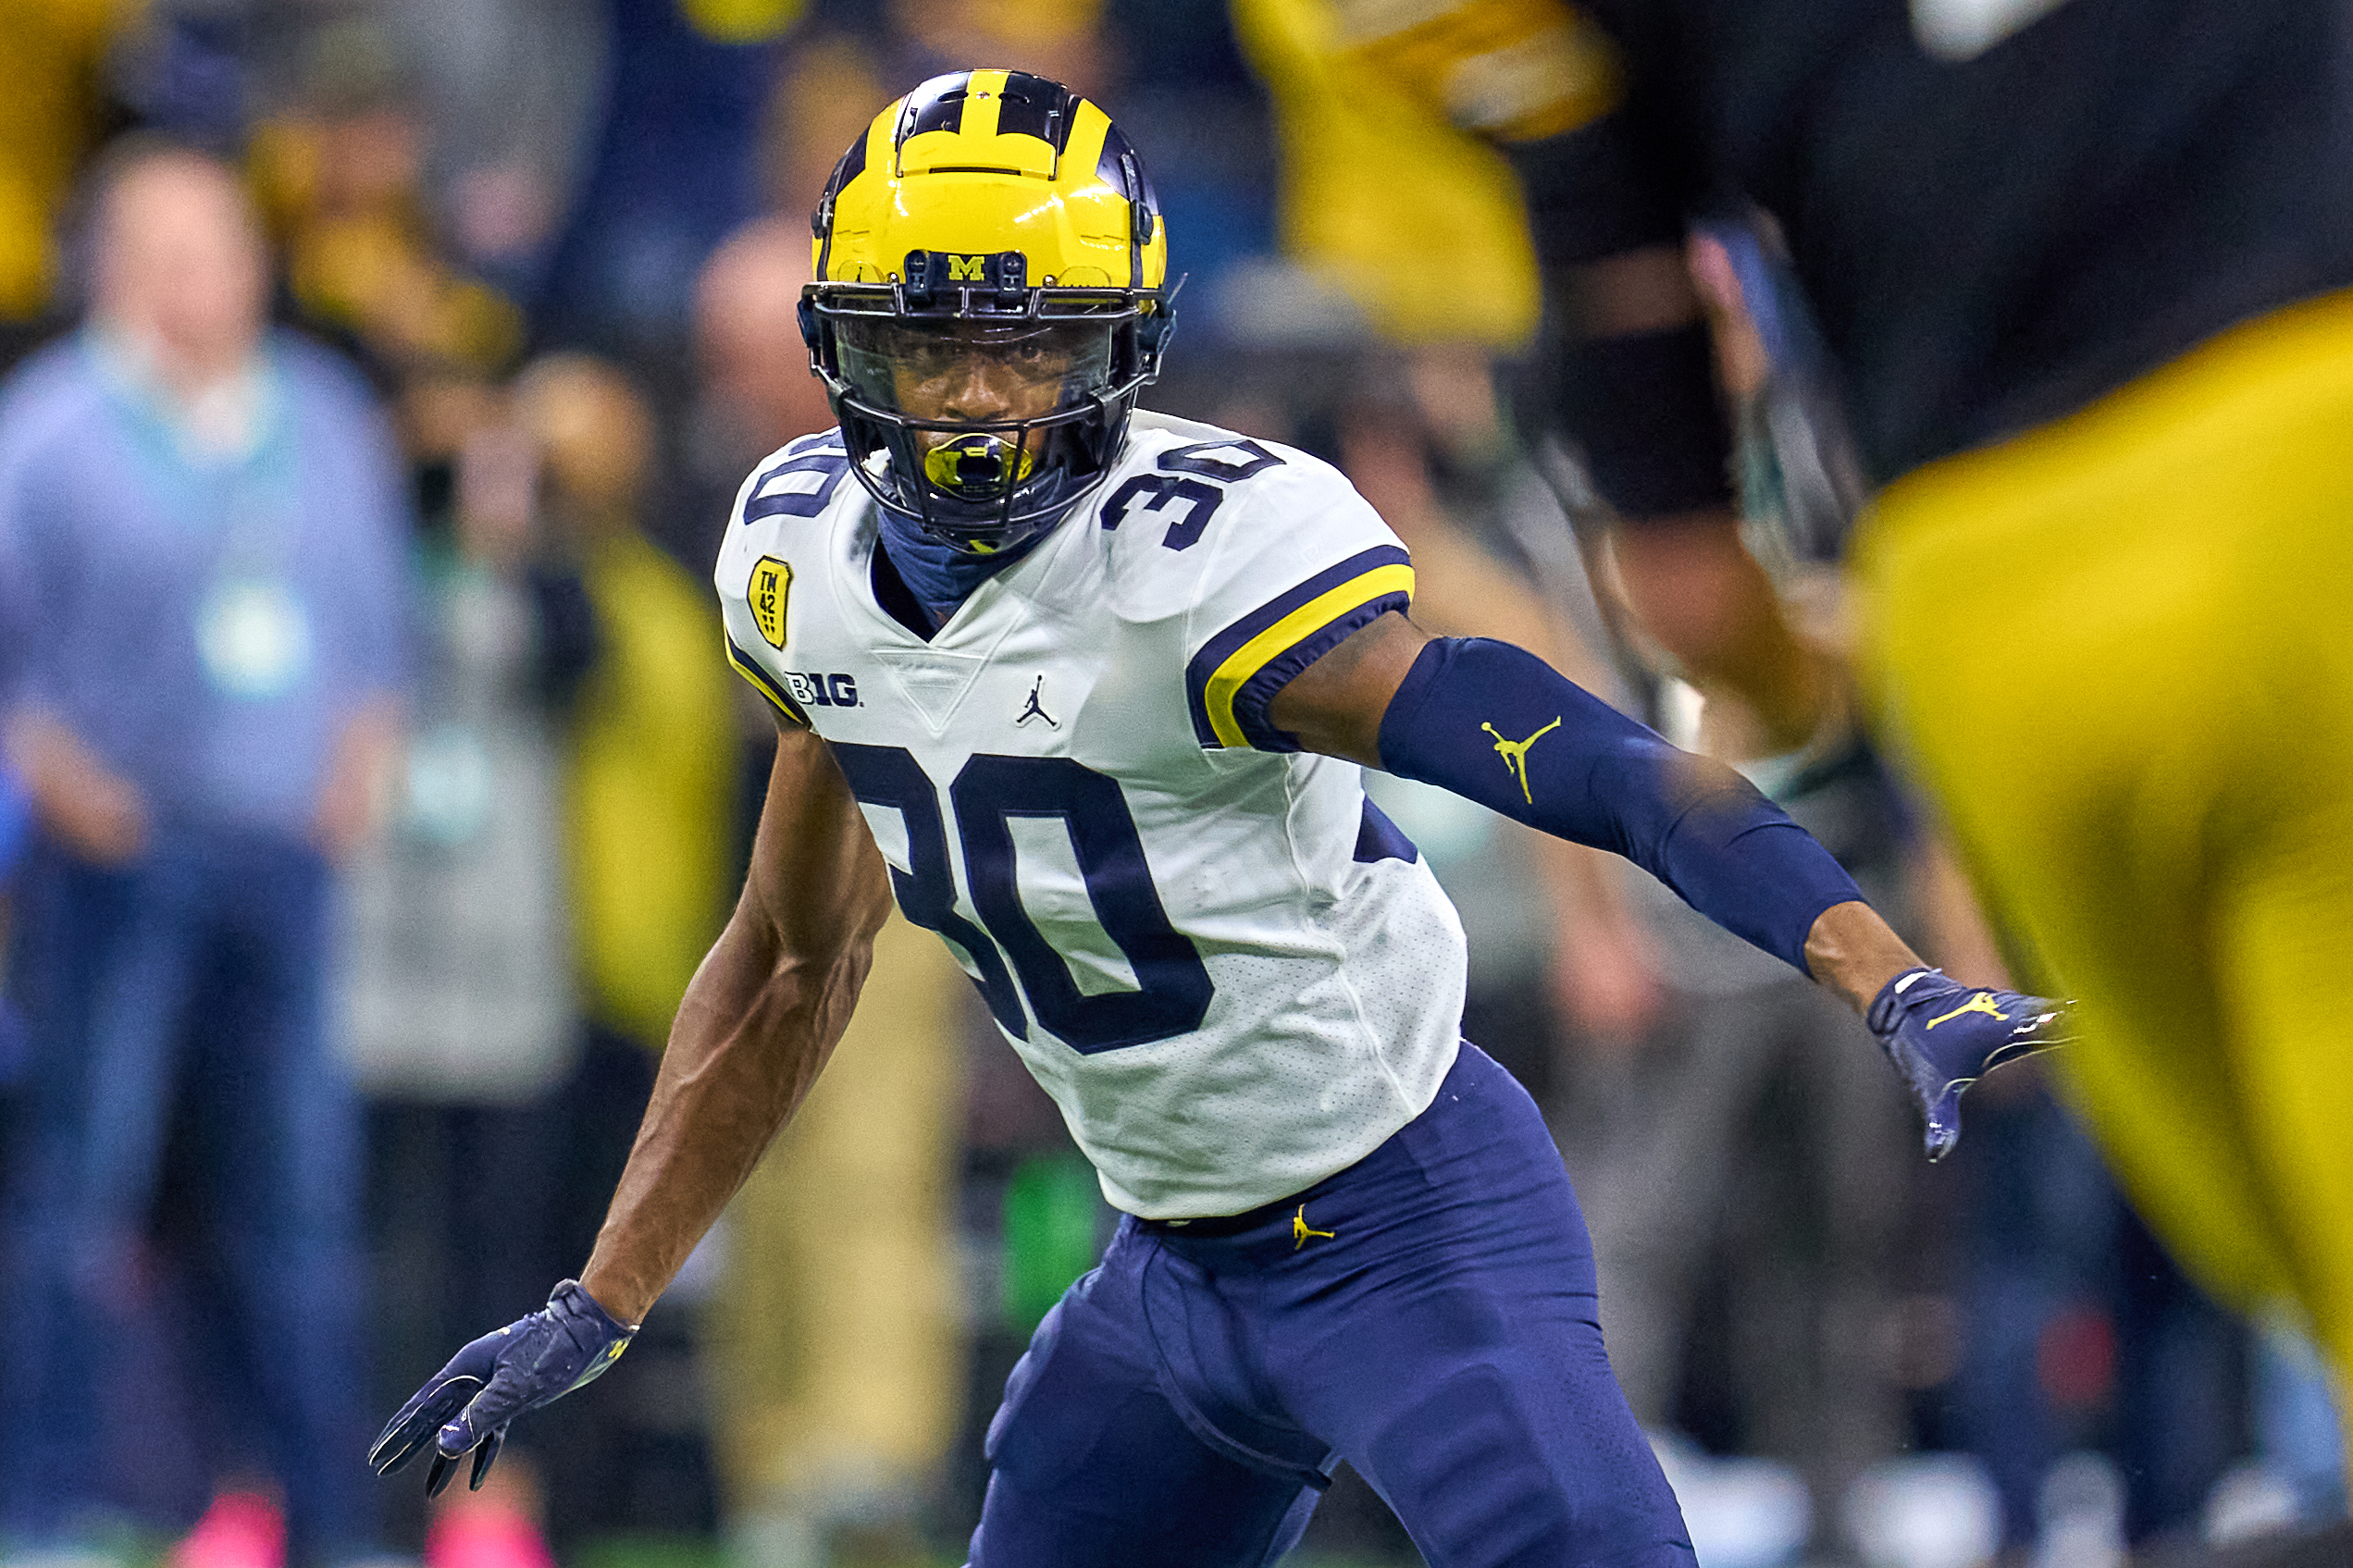 Michigan's Daxton Hill Declares for 2022 NFL Draft